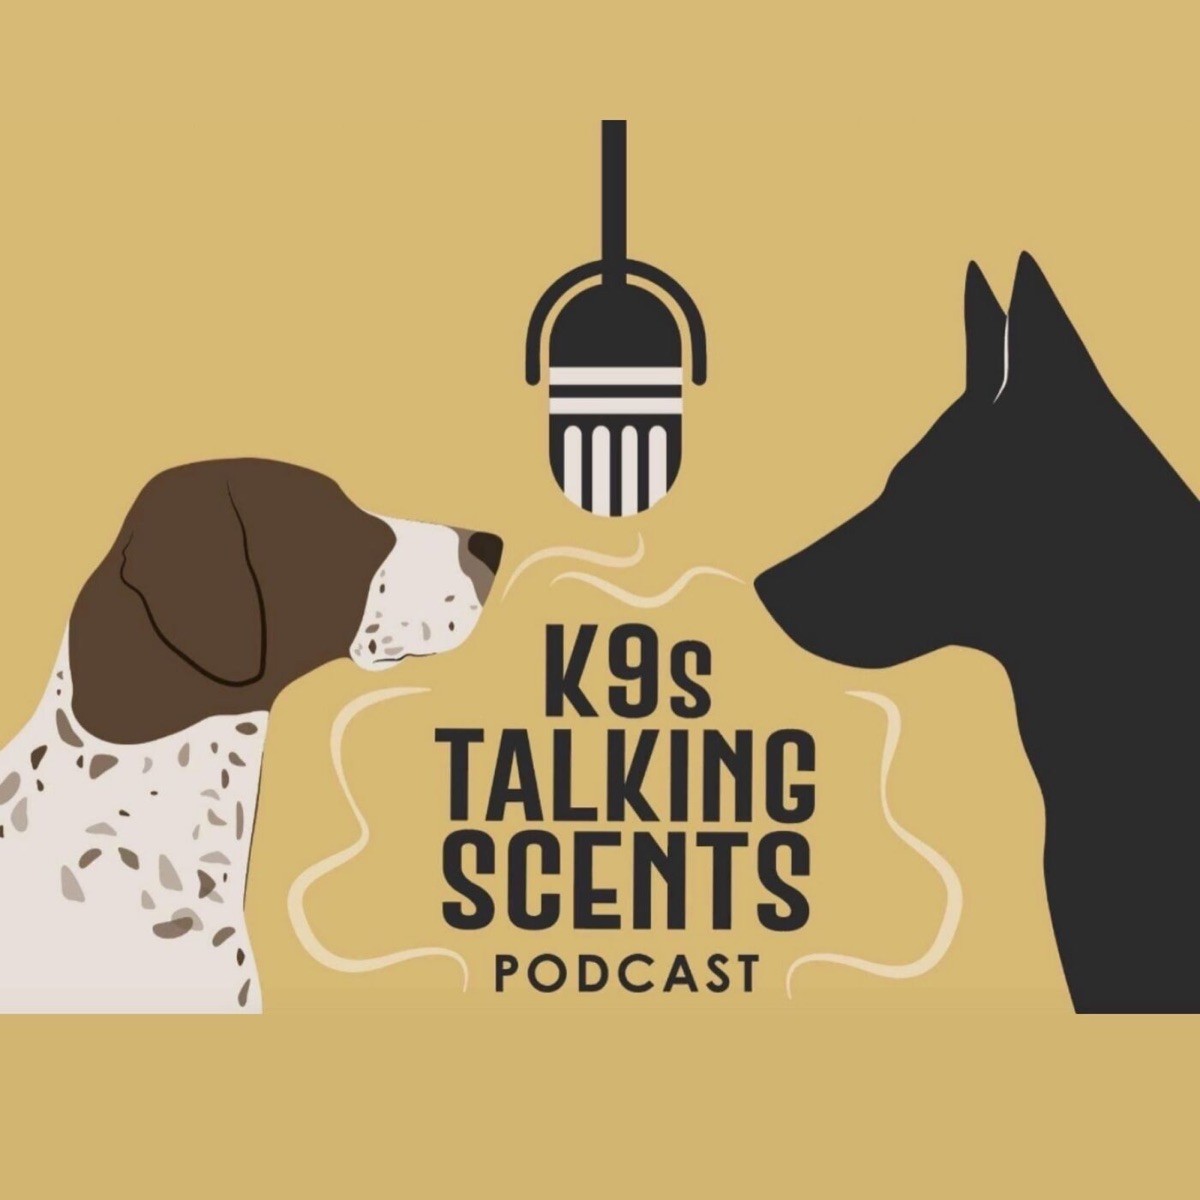 Sports With your Dog: Nosework and Selective Scent Detection